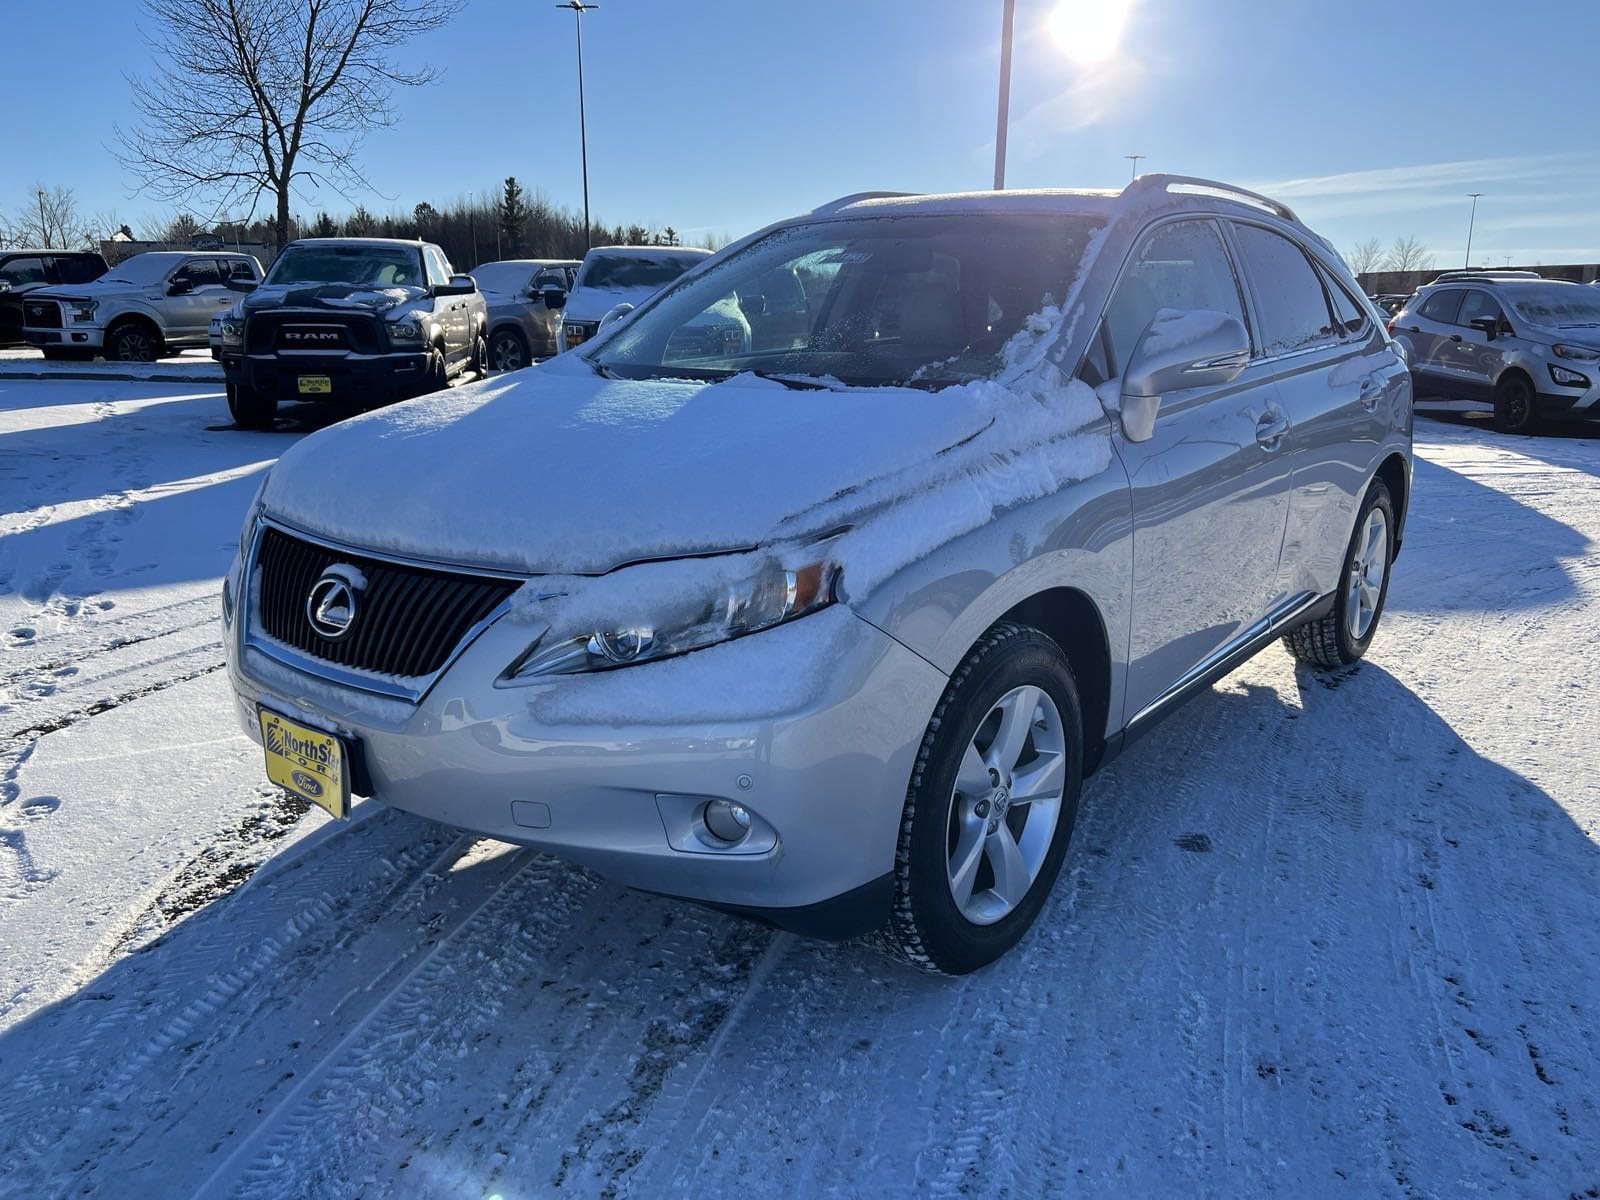 Used 2011 Lexus RX 350 with VIN 2T2BK1BA2BC087239 for sale in Duluth, Minnesota